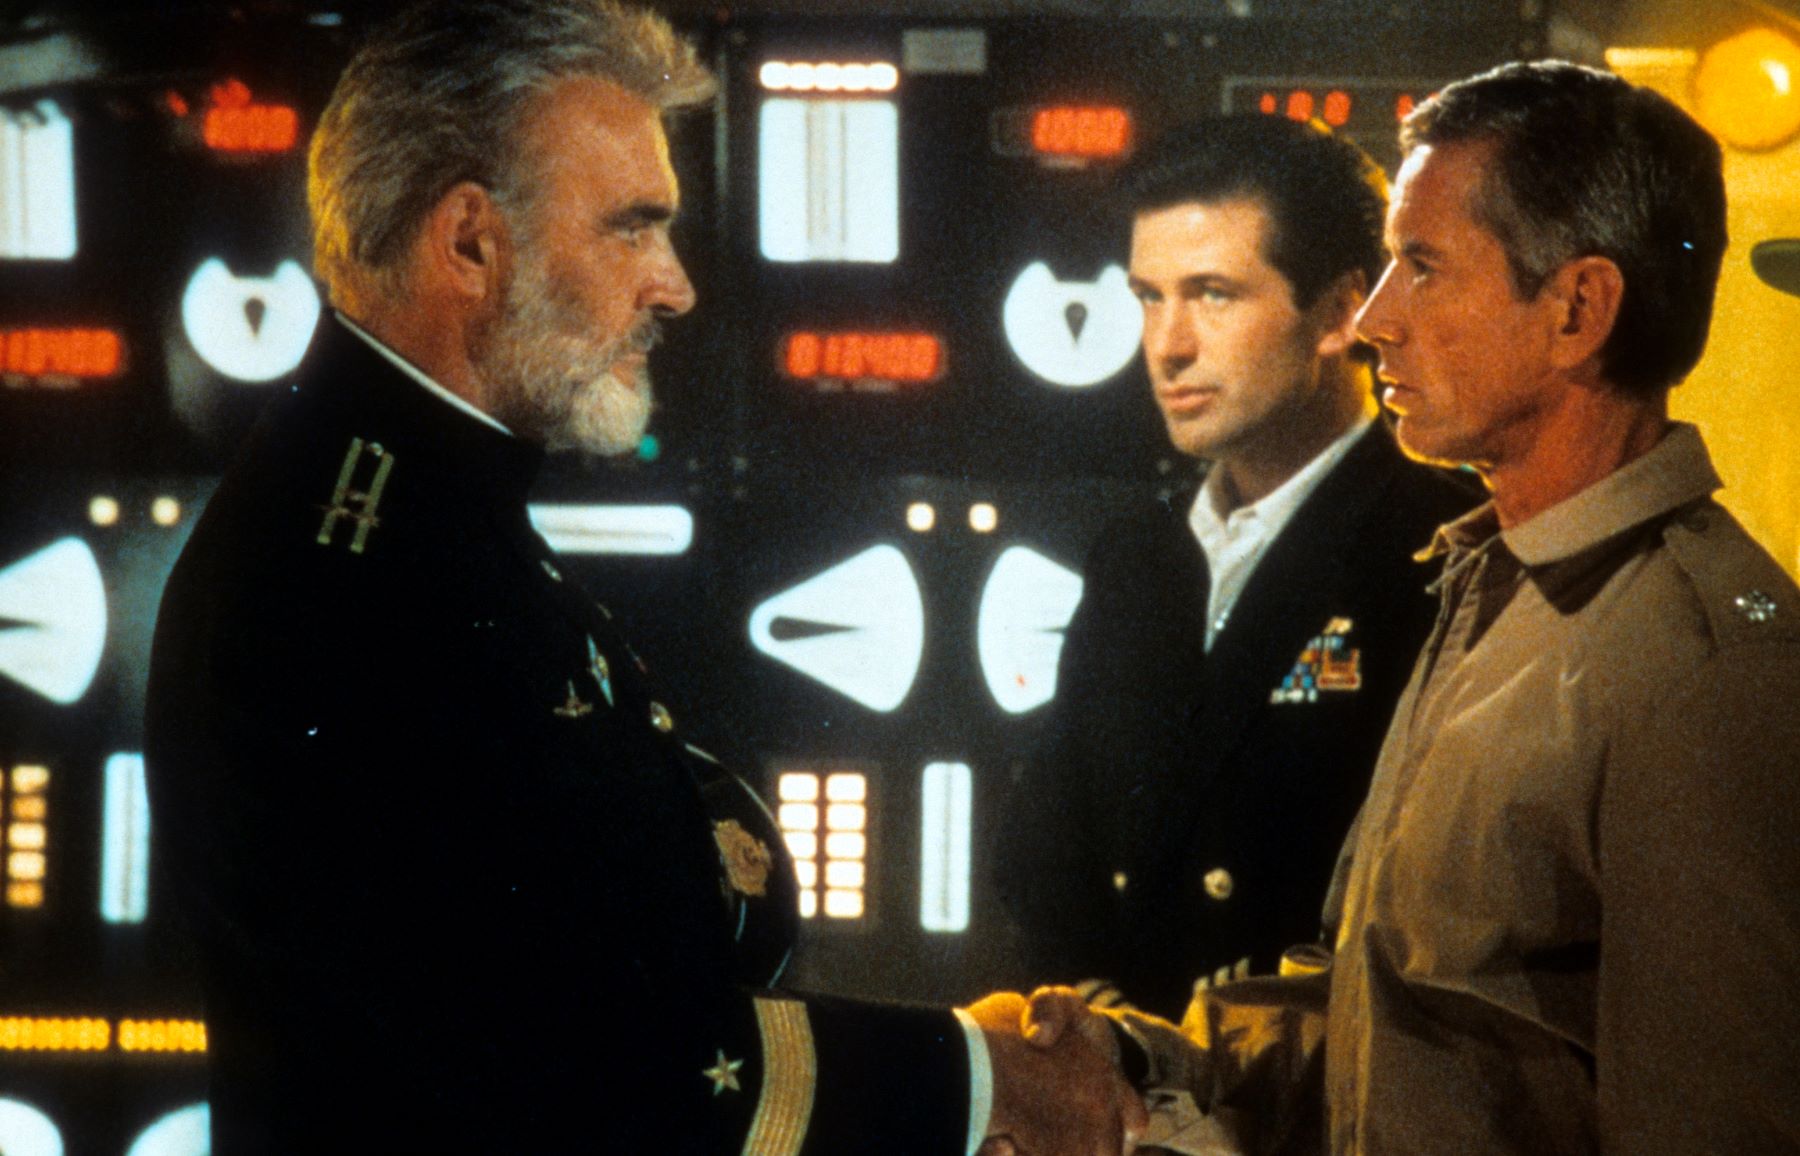 Sean Connery and Alec Baldwin in 'The Hunt for Red October'